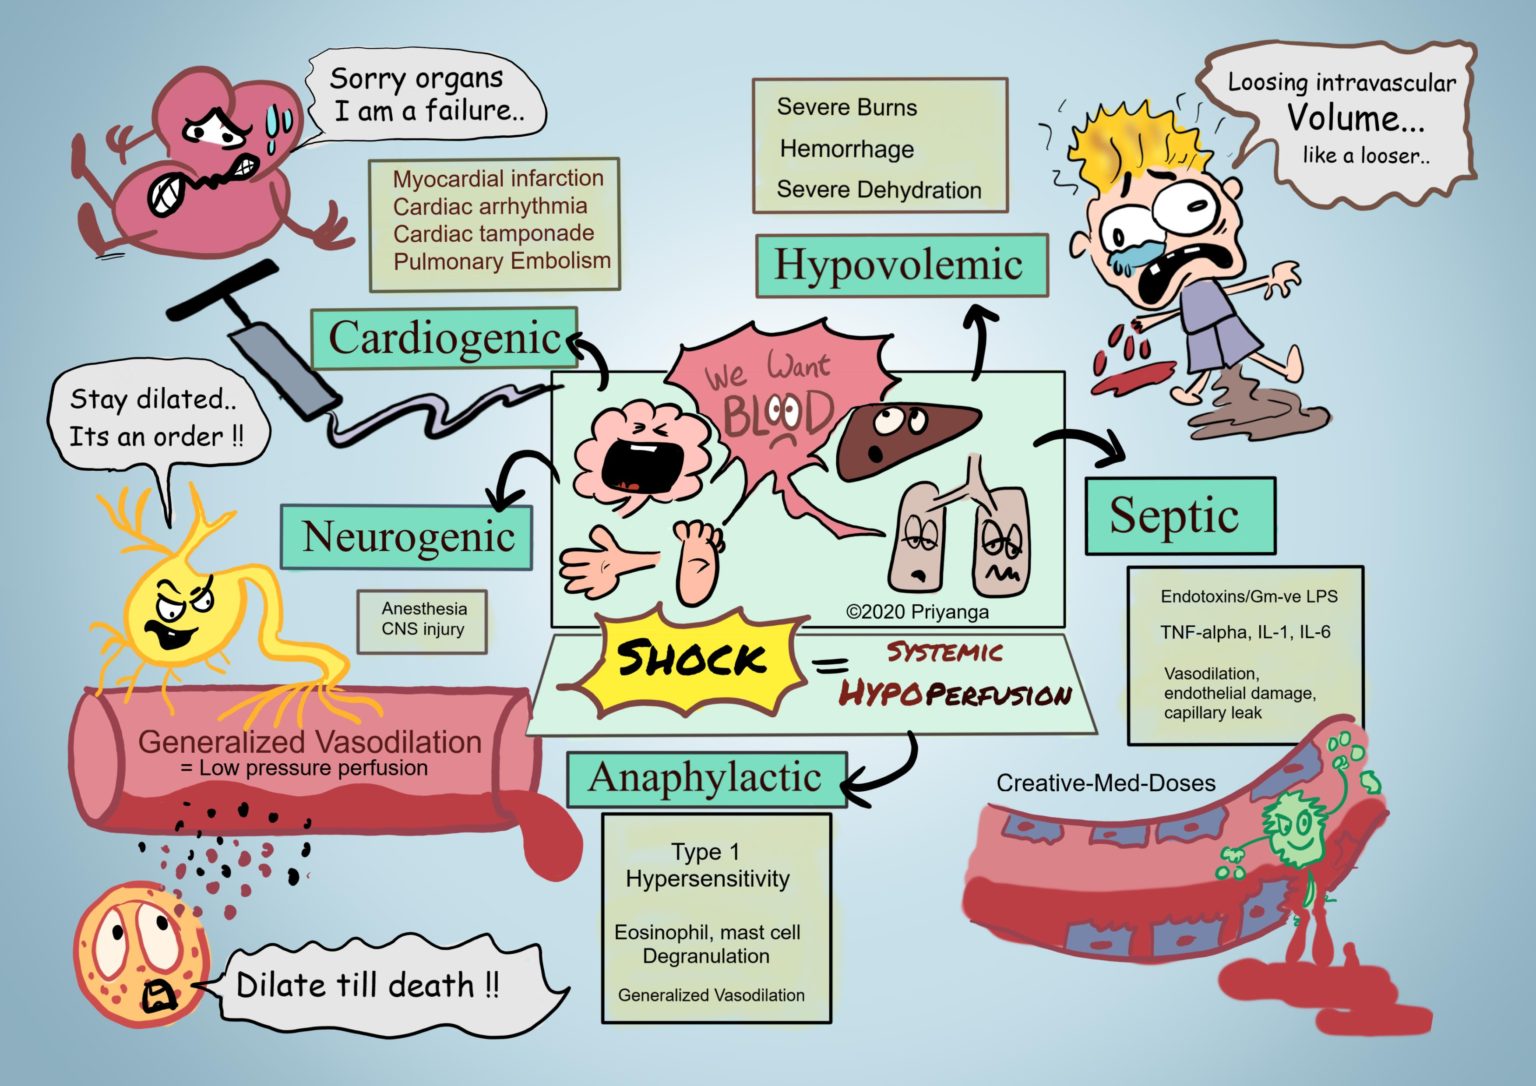 shock-systemic-hypoperfusion-creative-med-doses